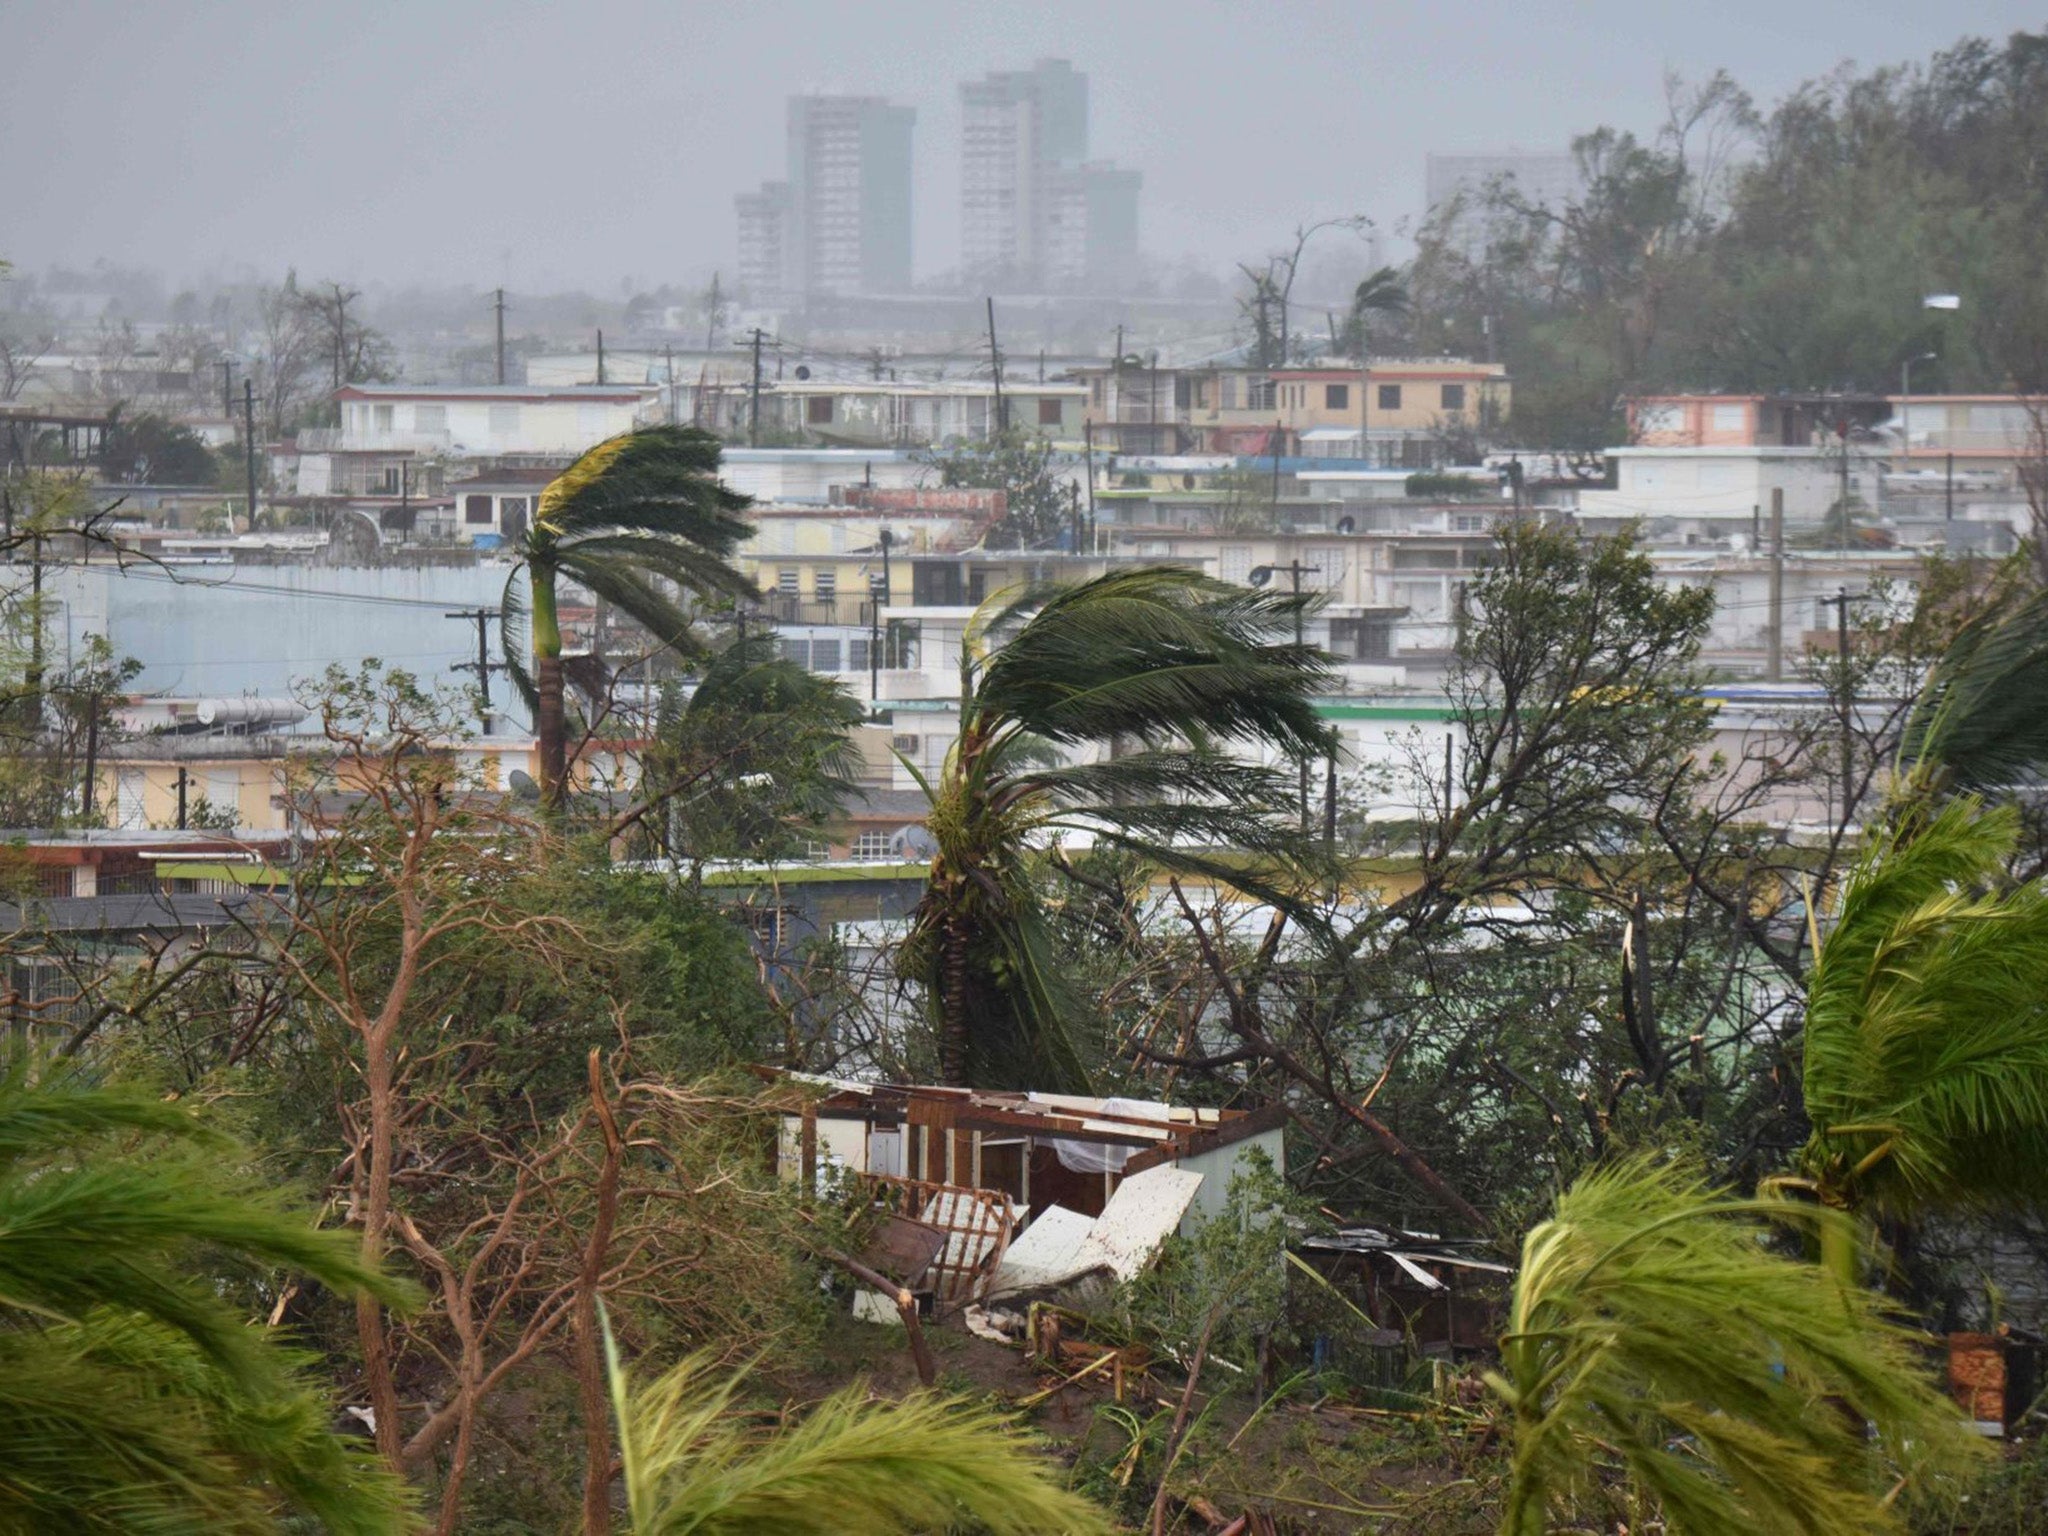 Hurricane Maria is the strongest storm to hit Puerto Rico in 80 years